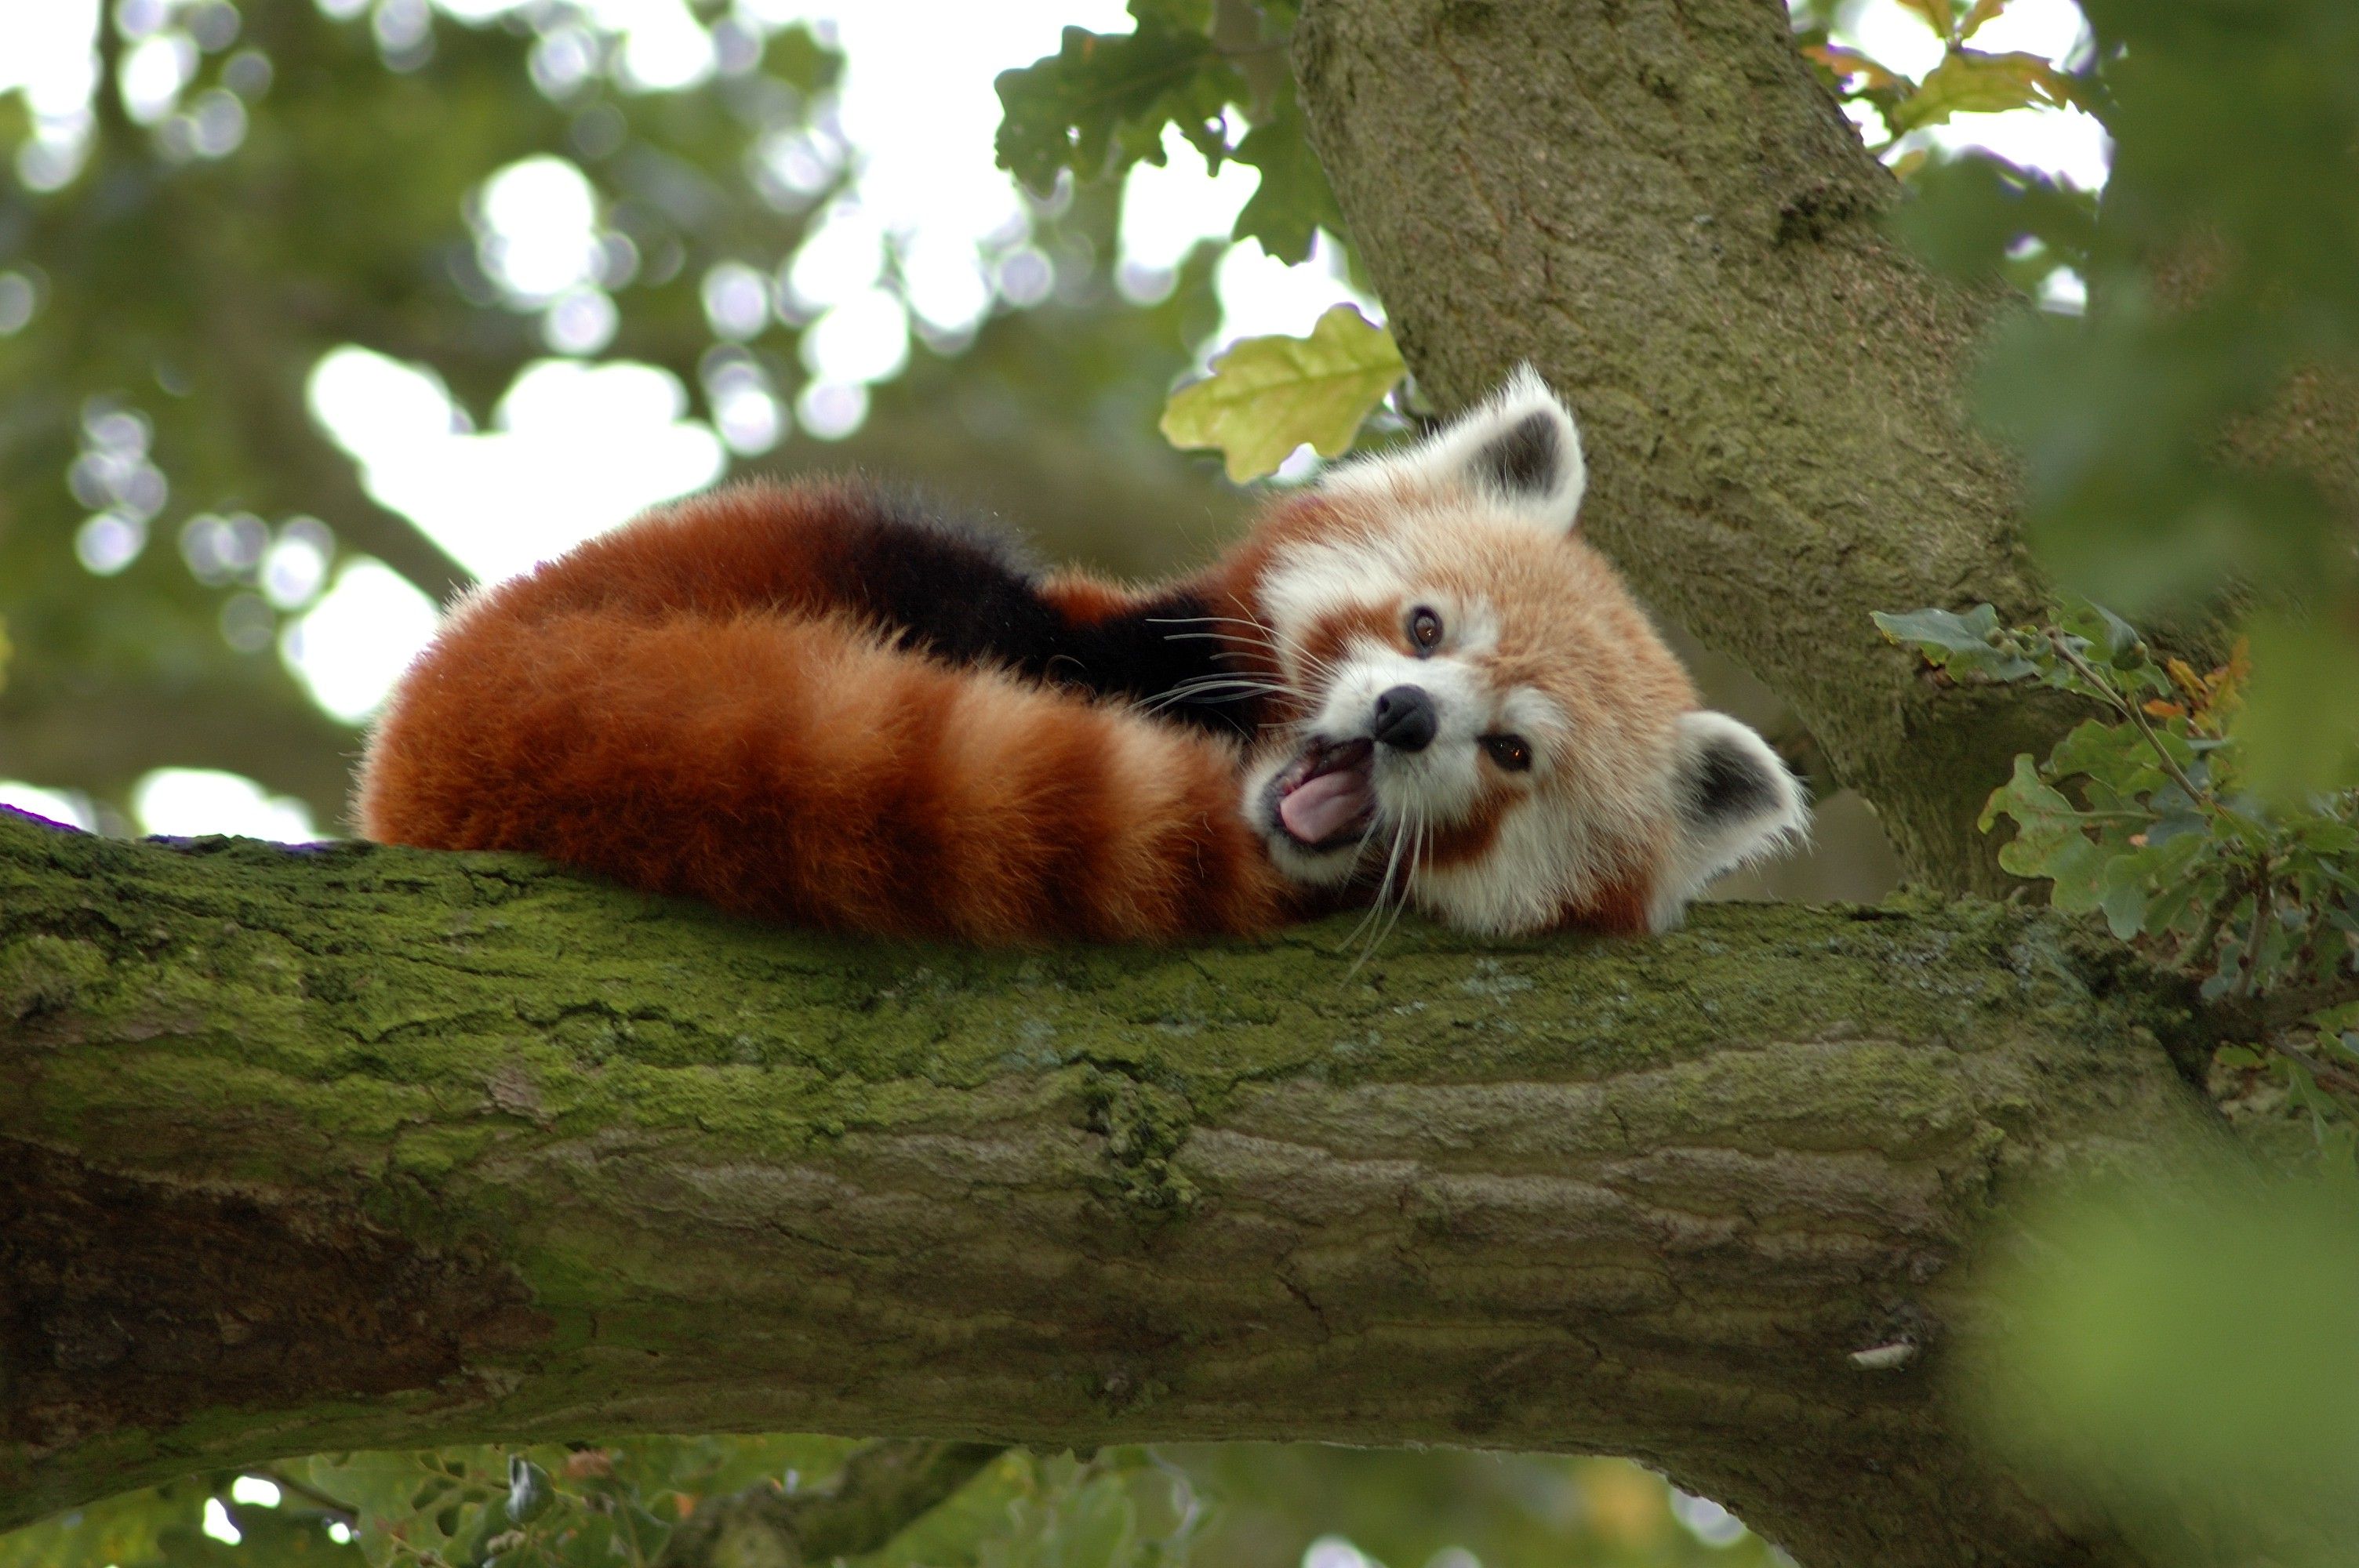 Share 60+ cute red panda wallpaper latest - in.cdgdbentre